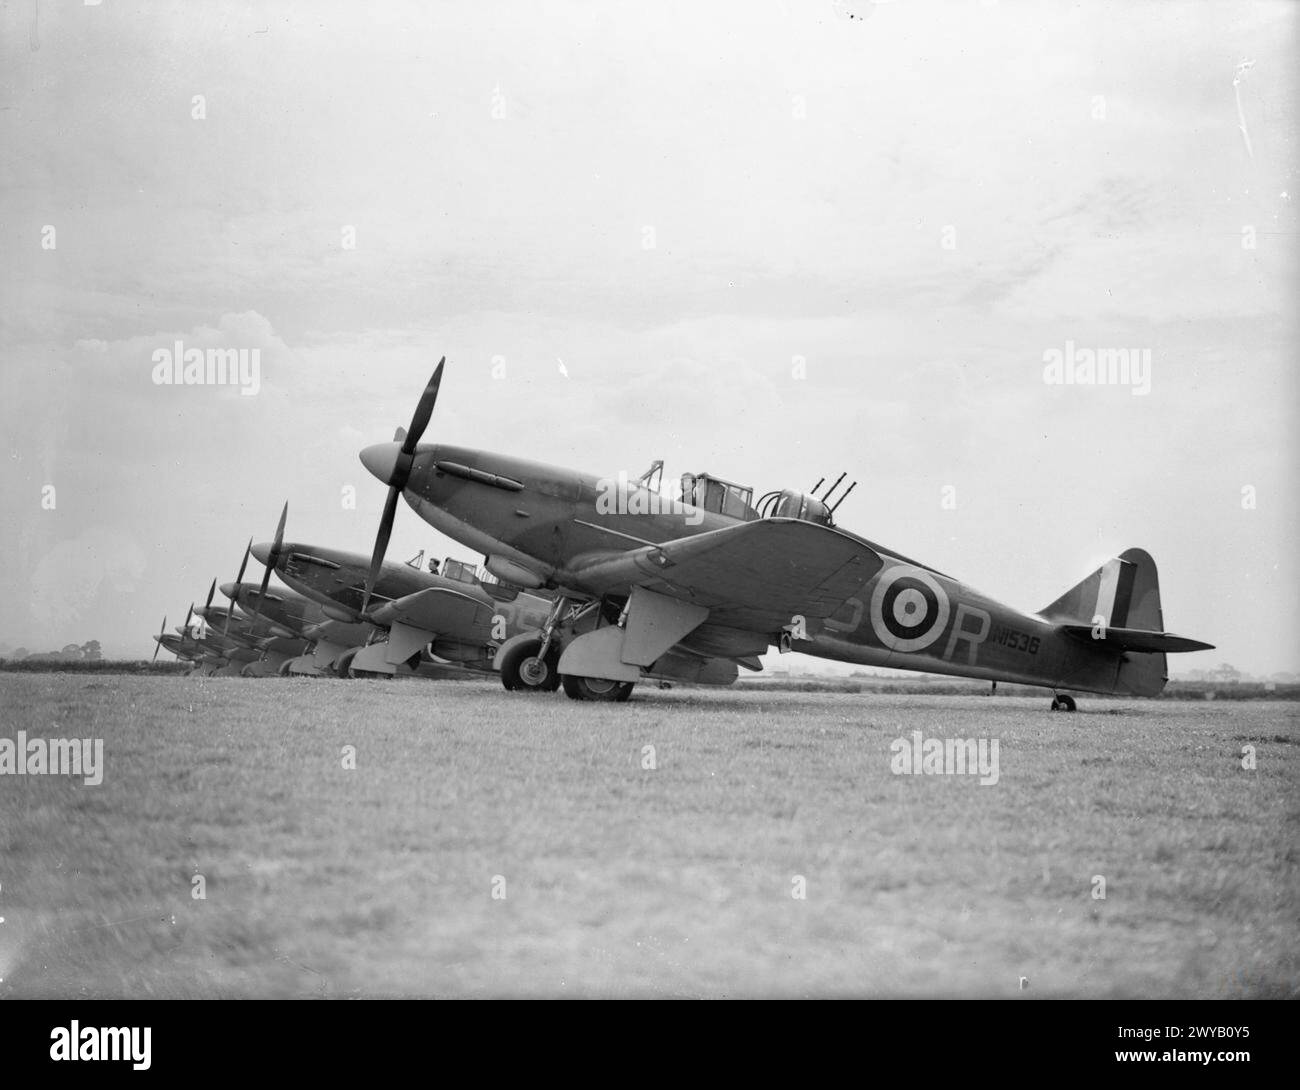 THE BATTLE OF BRITAIN 1940 - Boulton Paul Defiants of No. 264 Squadron, Kirton in Lindsey, Lincolnshire, August 1940. , Royal Air Force, 264 Squadron Stock Photo